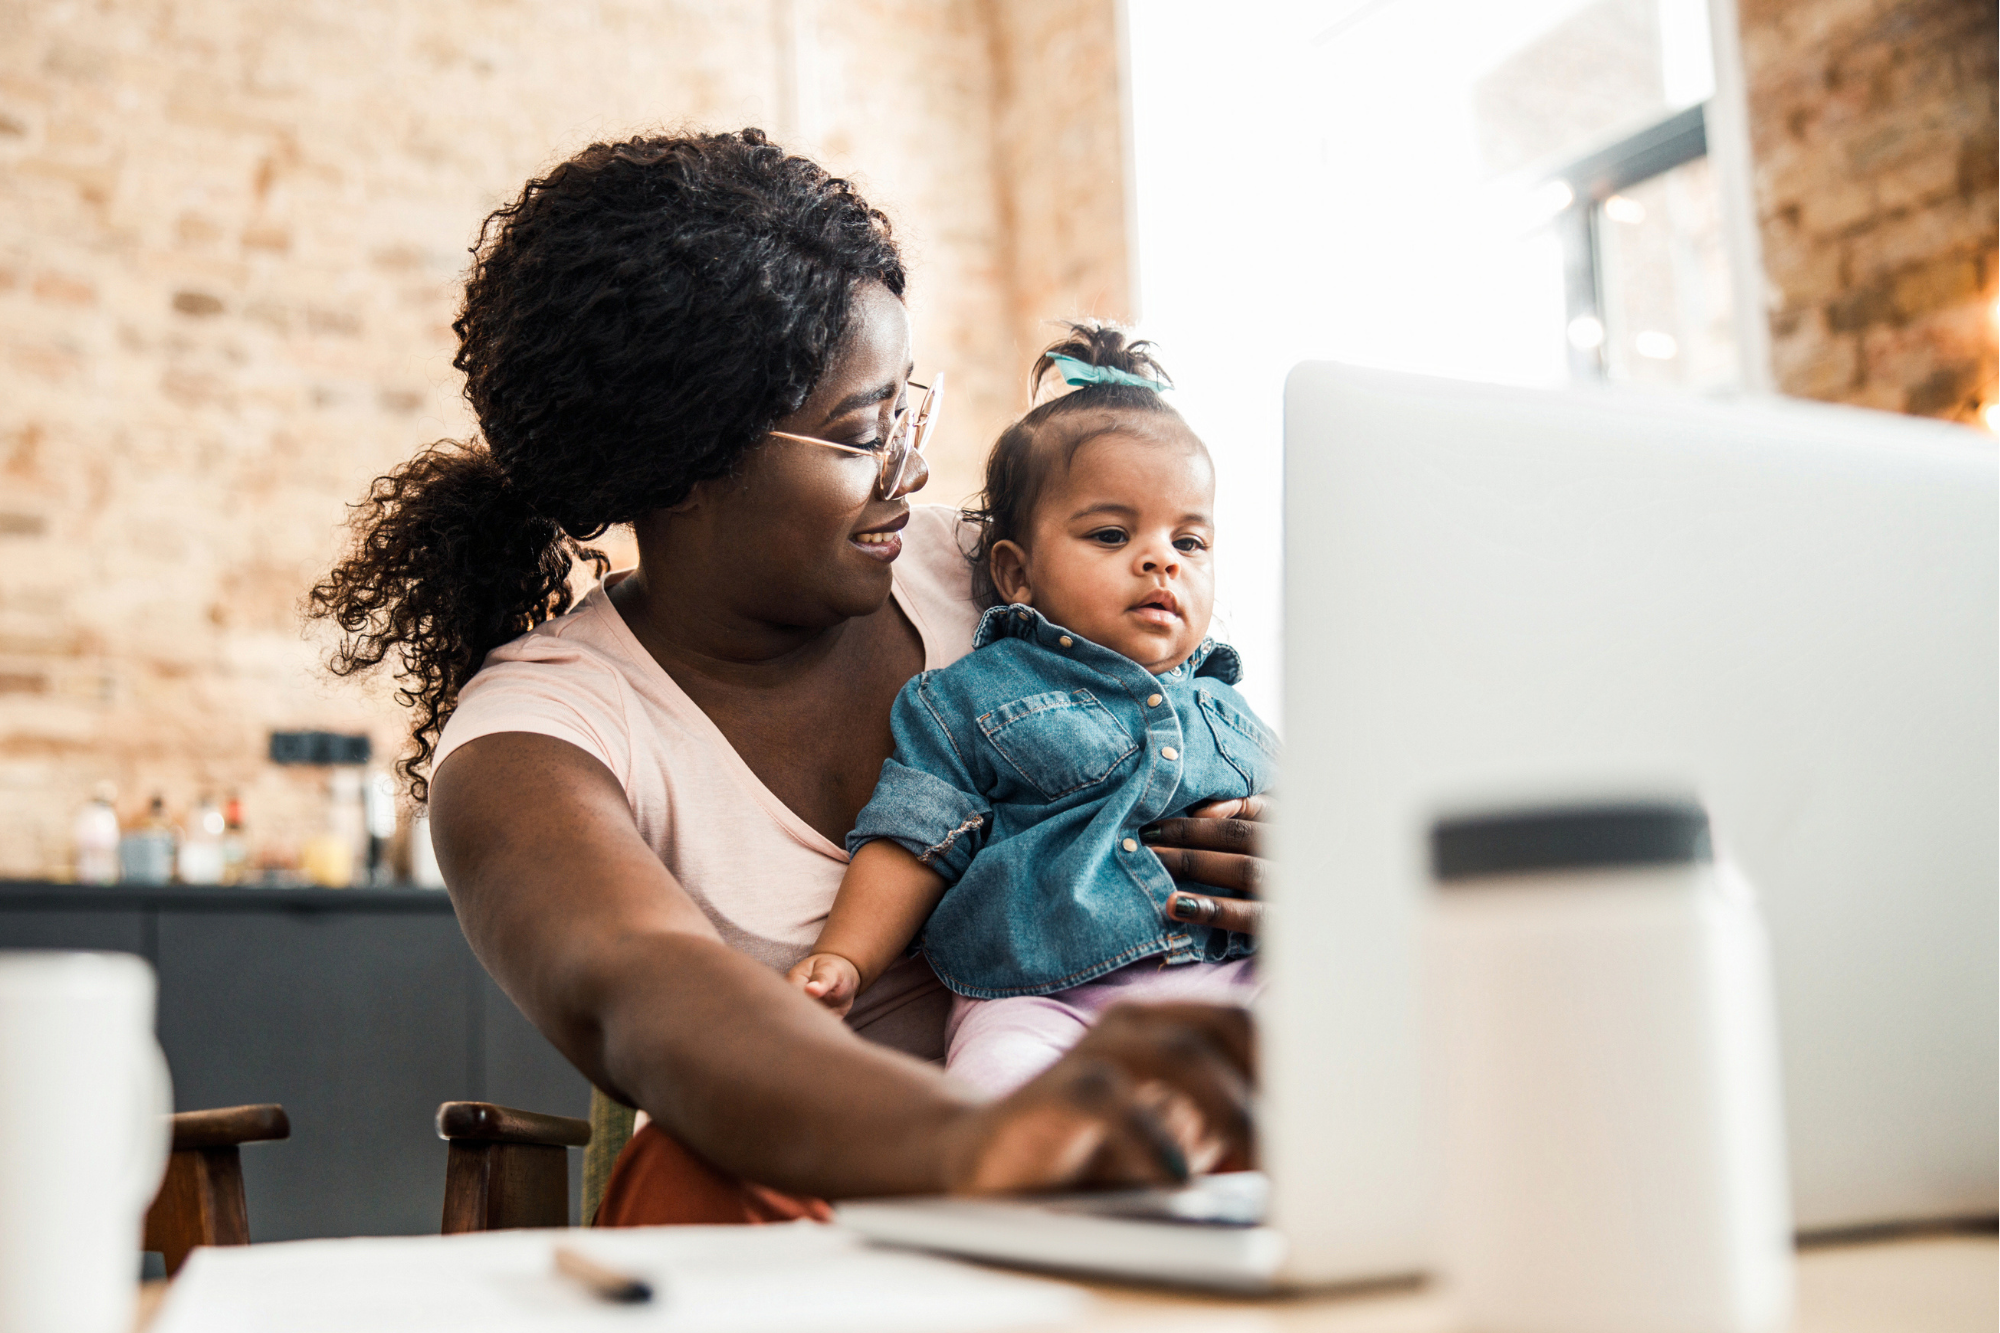 Image of a mother with her baby sitting in front of a laptop reading from the computer